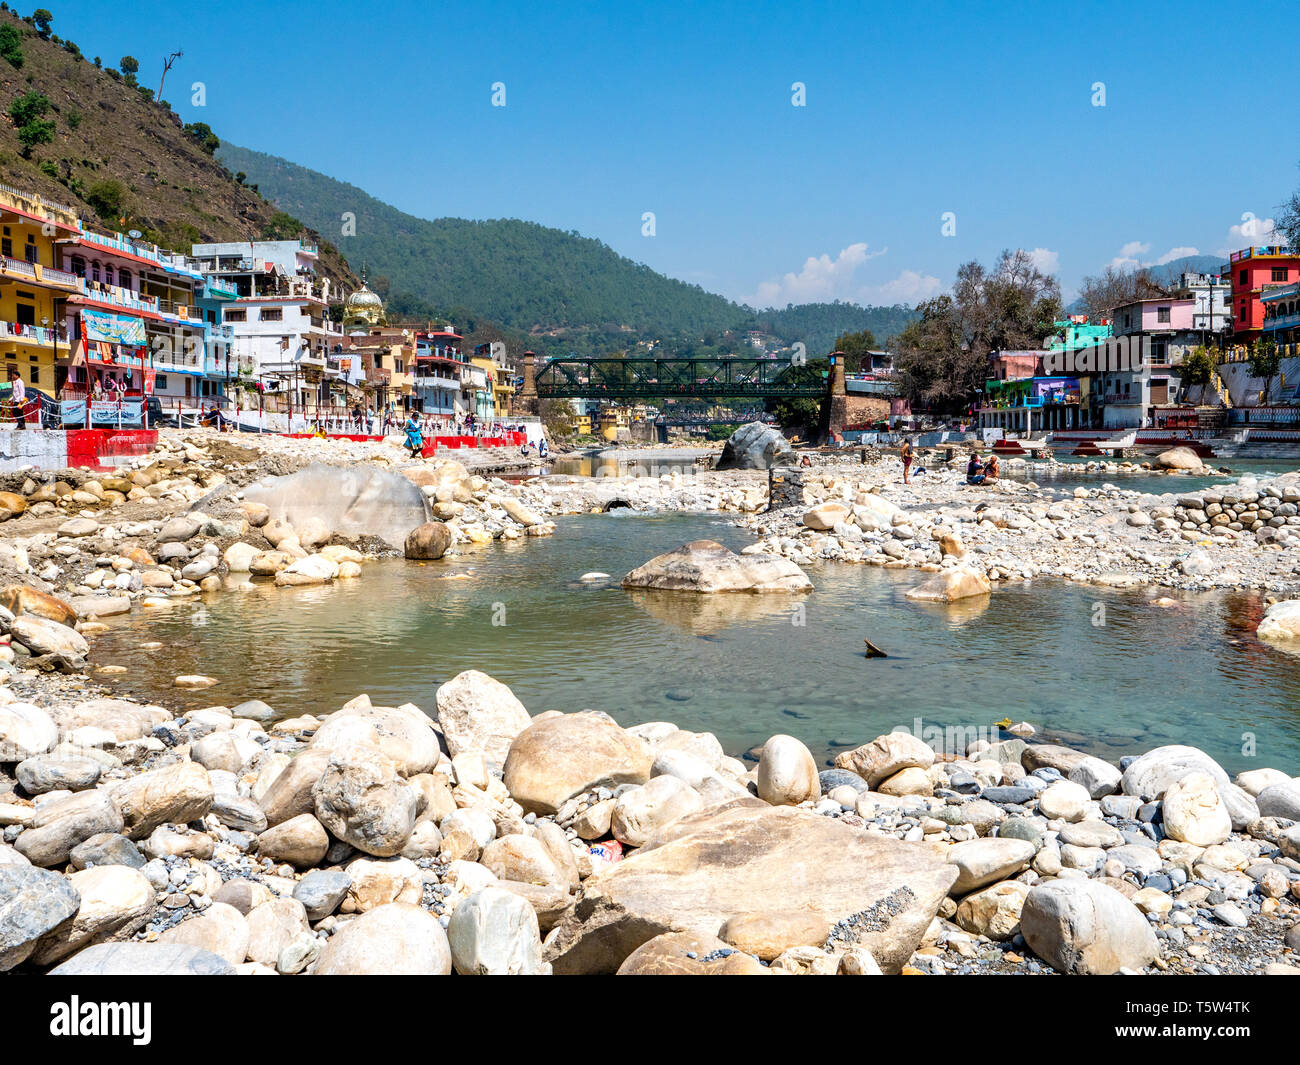 The city of Bageshwar in the Uttarakhand state of Northern India at the confluence of the Saryu and Gomati rivers Stock Photo